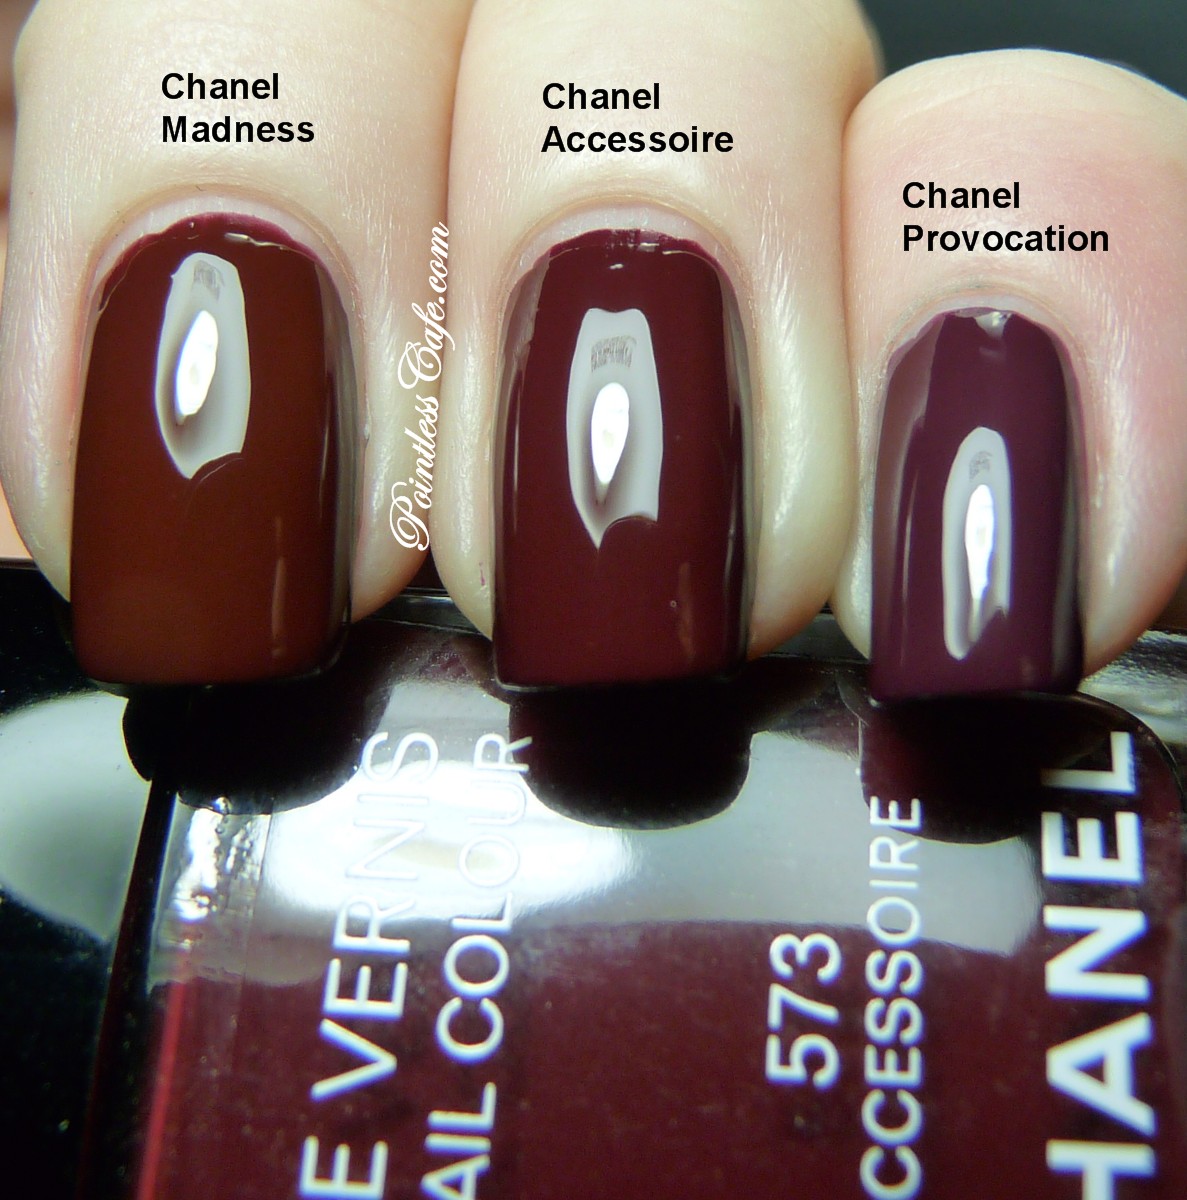 Chanel in #637 Malice Comparisons (15 polishes)